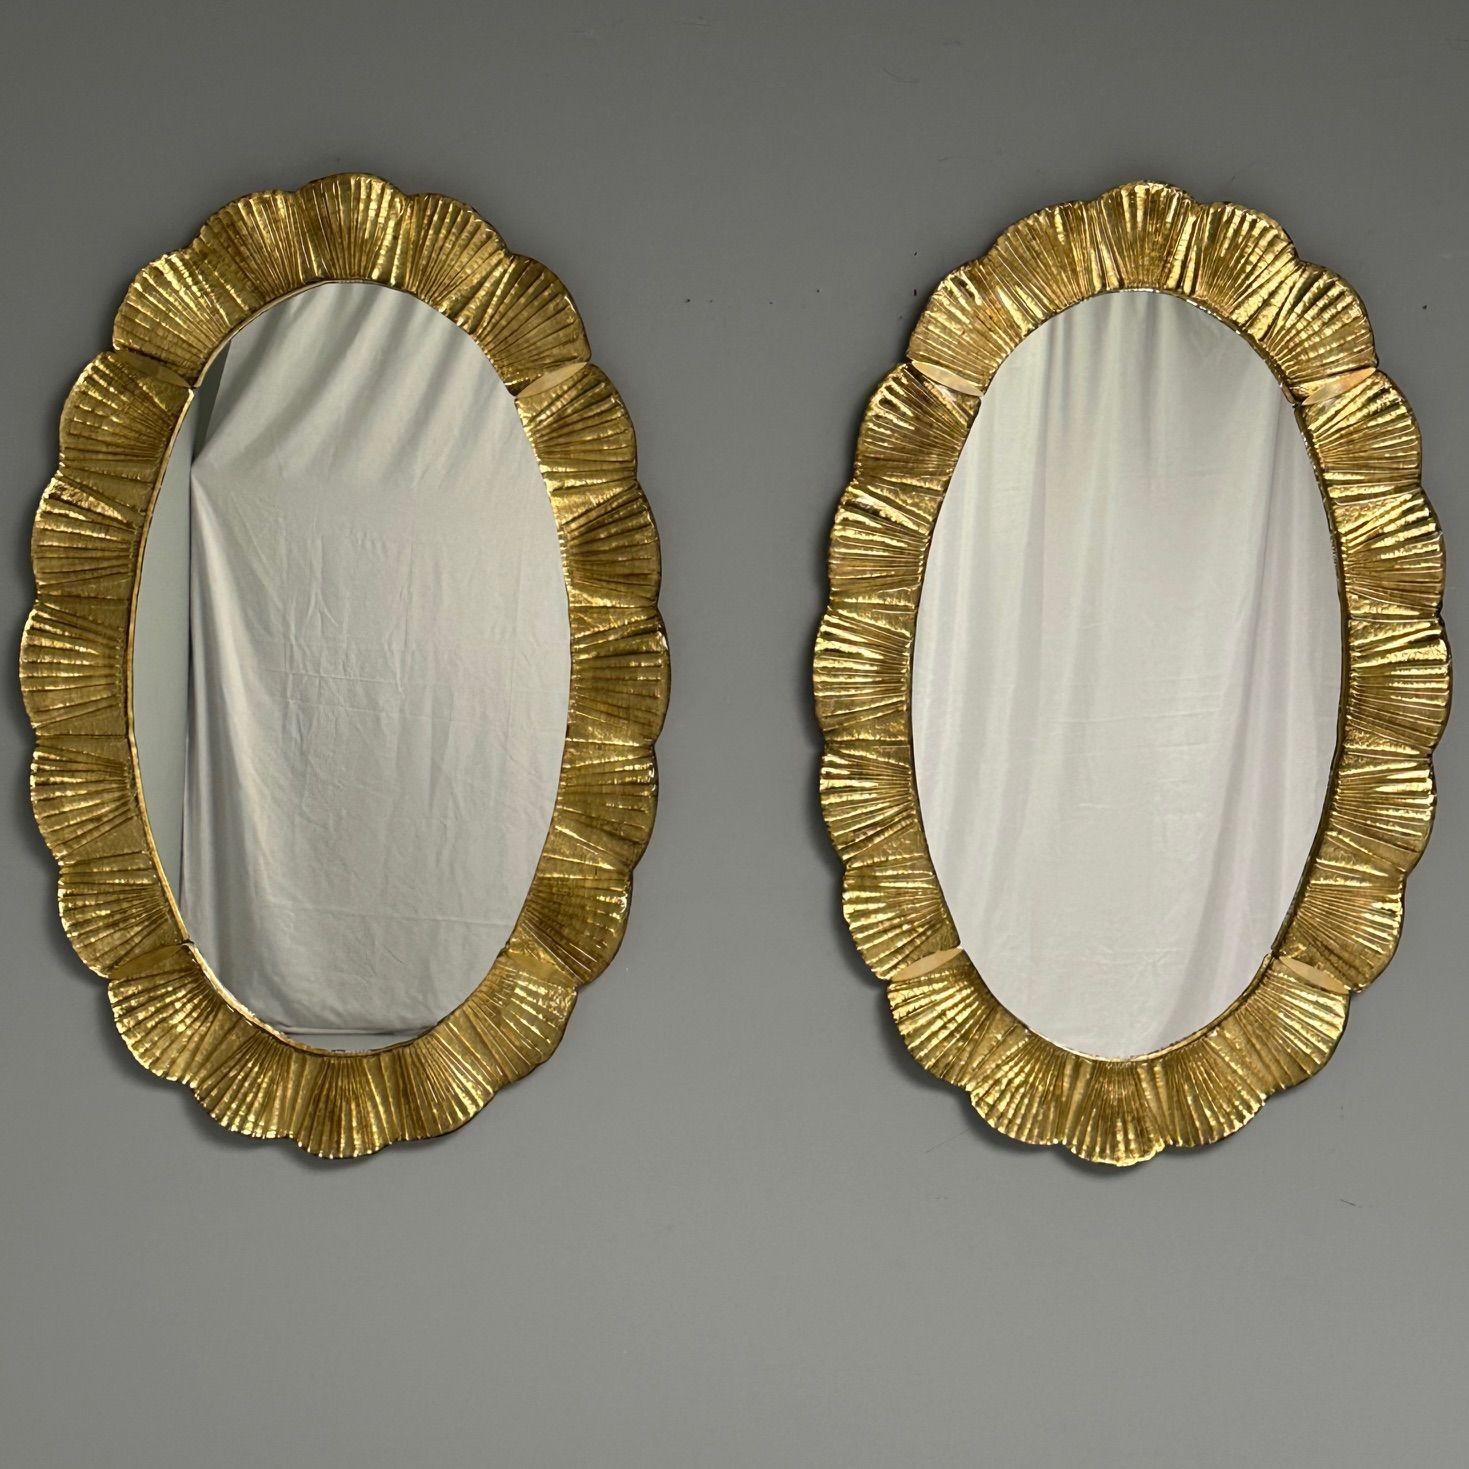 Contemporary, Oval Wall Mirrors, Scallop Motif, Murano Glass, Gilt Gold, Italy In Good Condition For Sale In Stamford, CT